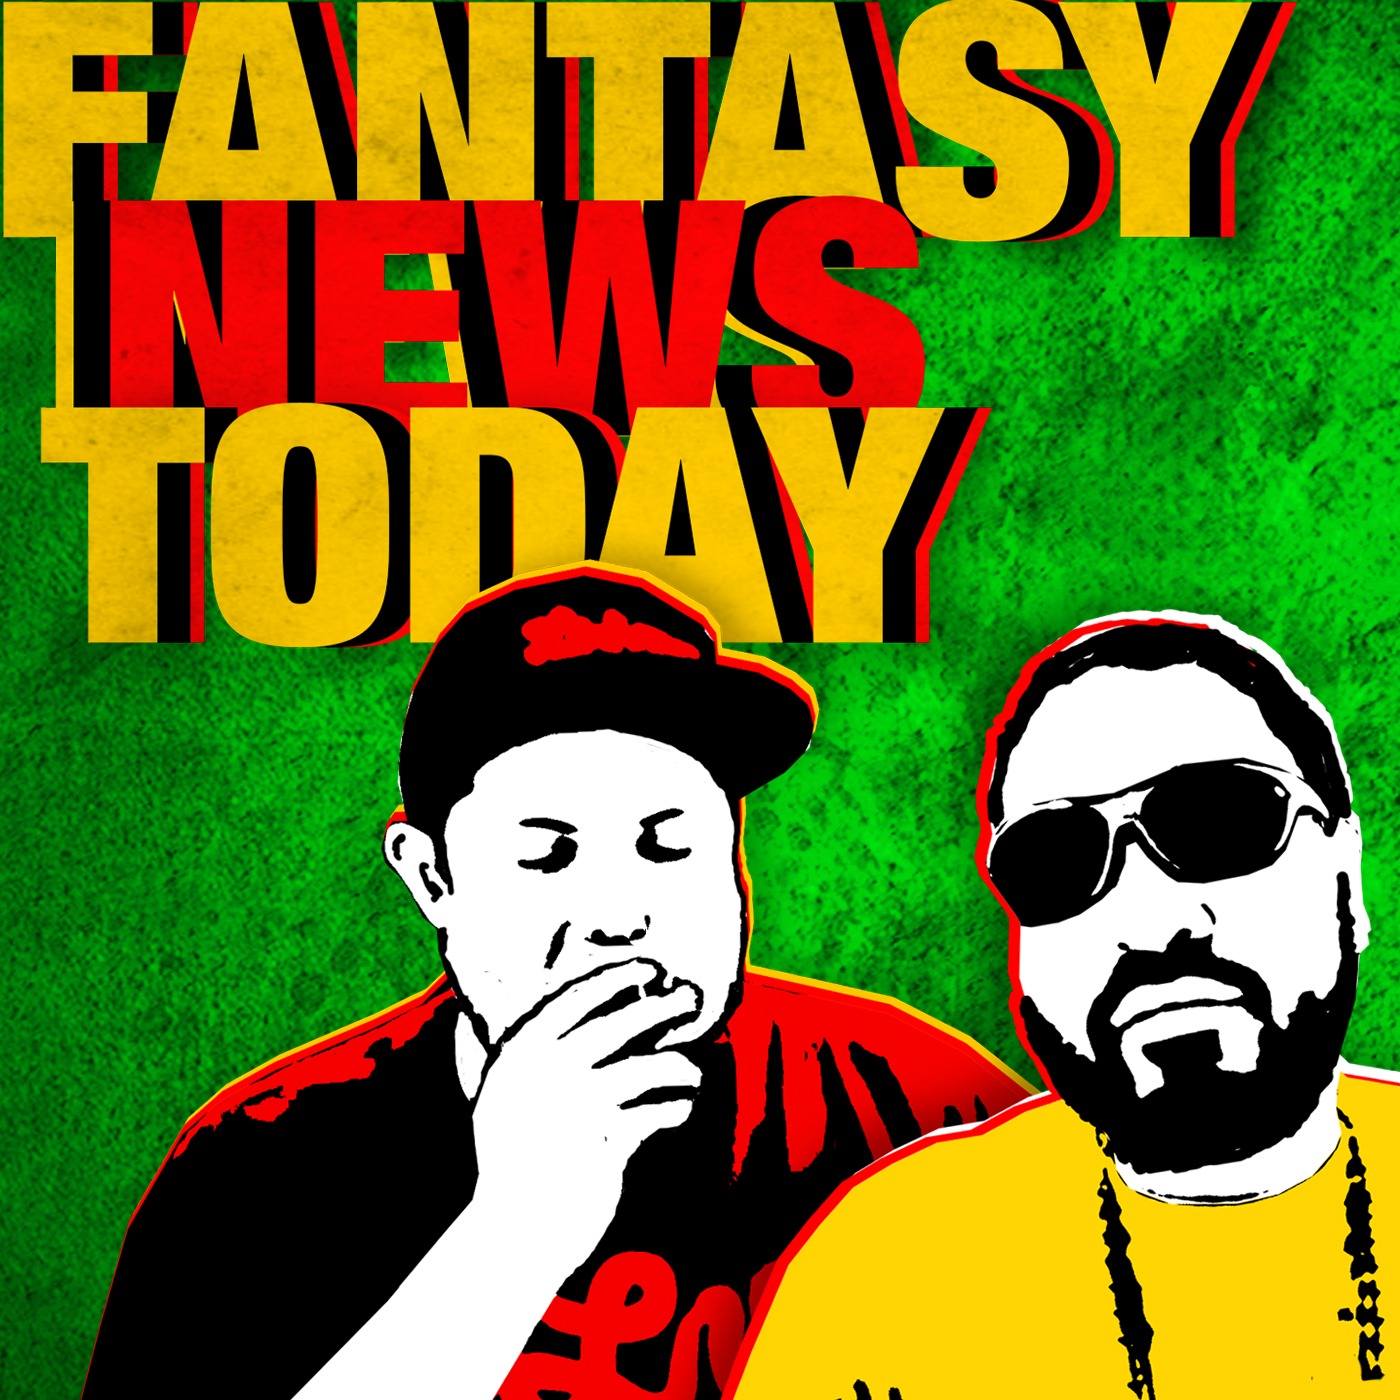 Fantasy Football News Today LIVE, Wednesday May 11th Image